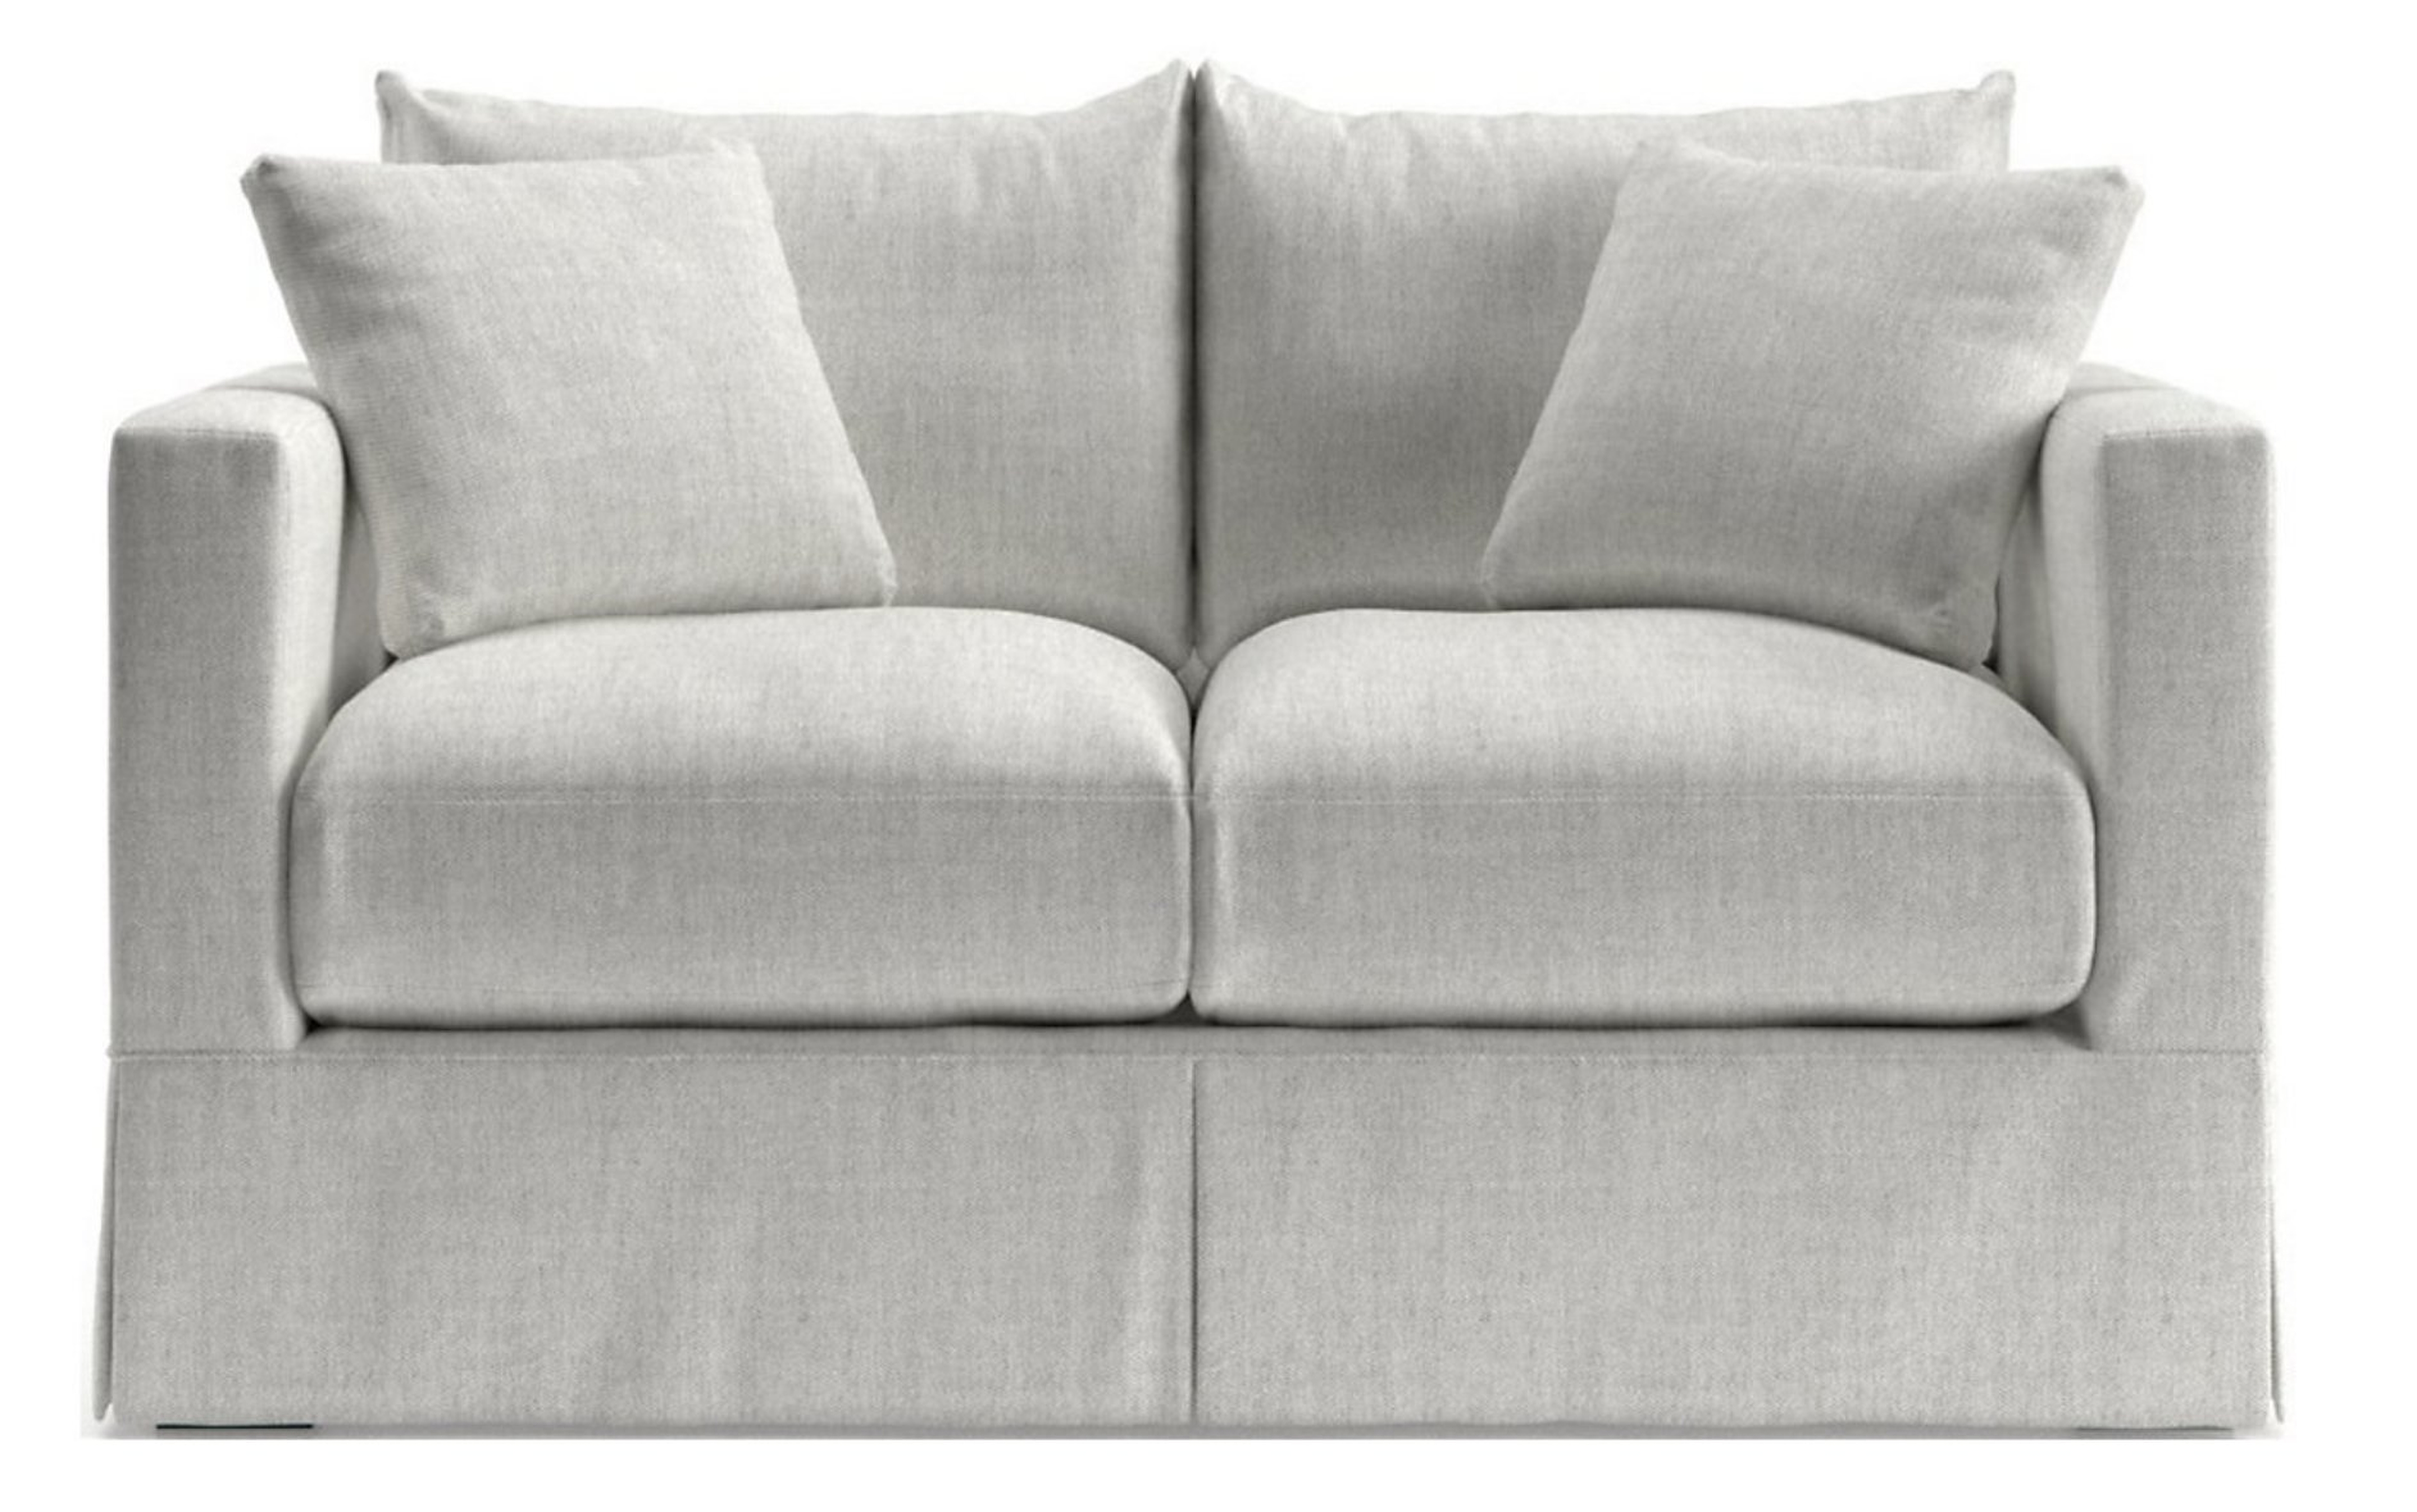 Willow Loveseat - Crate and Barrel